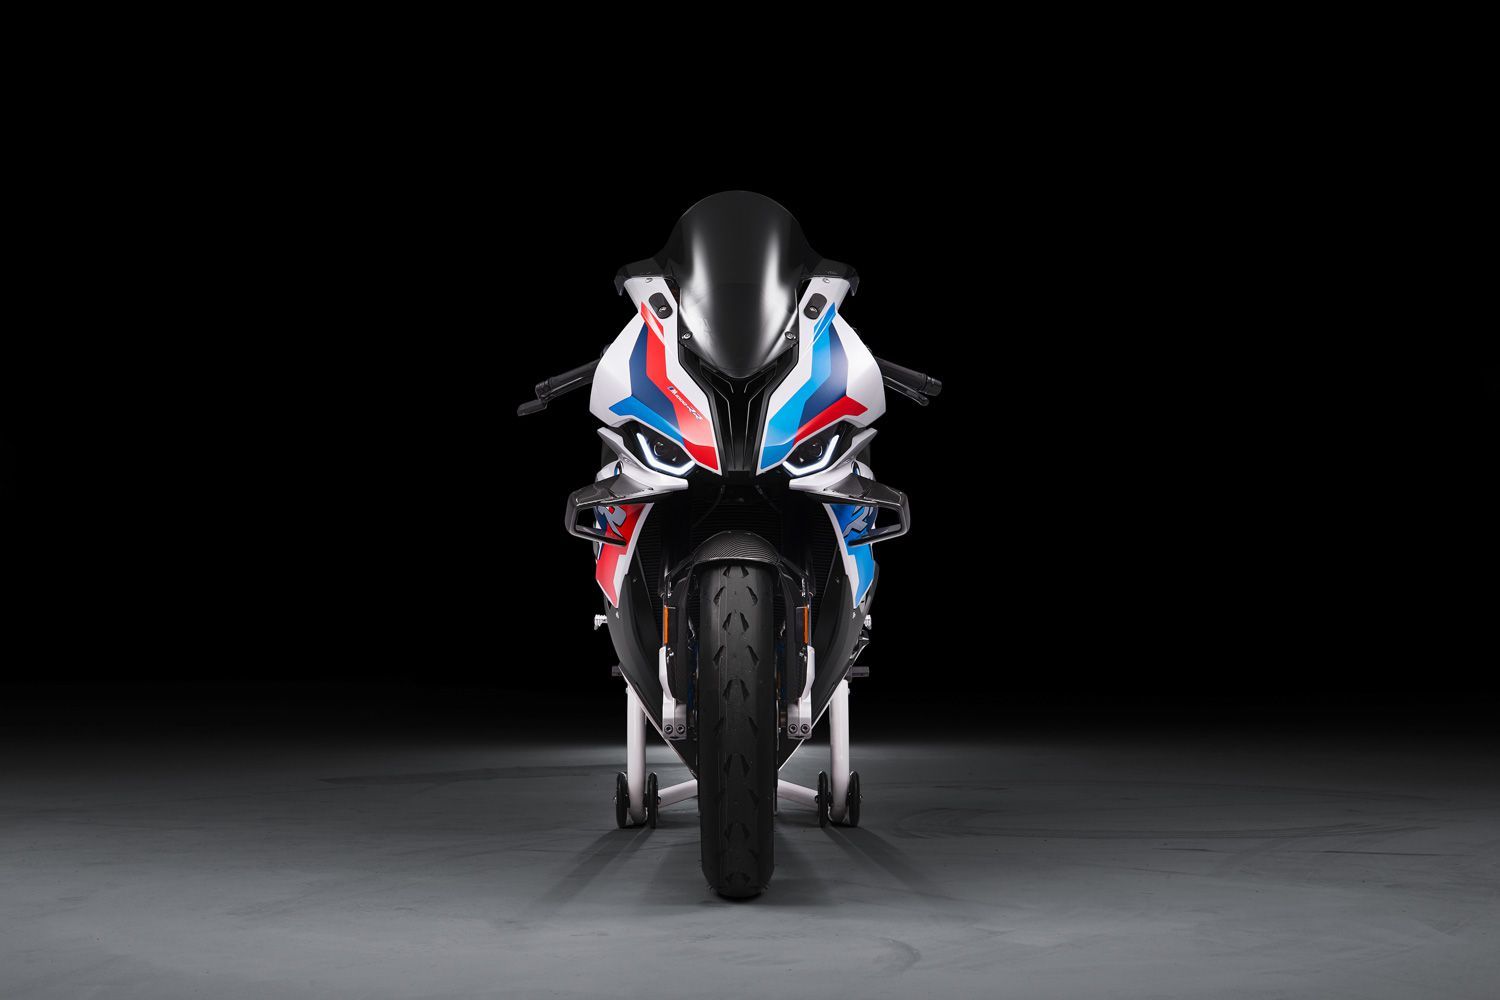 BMW M 1000 RR First Look